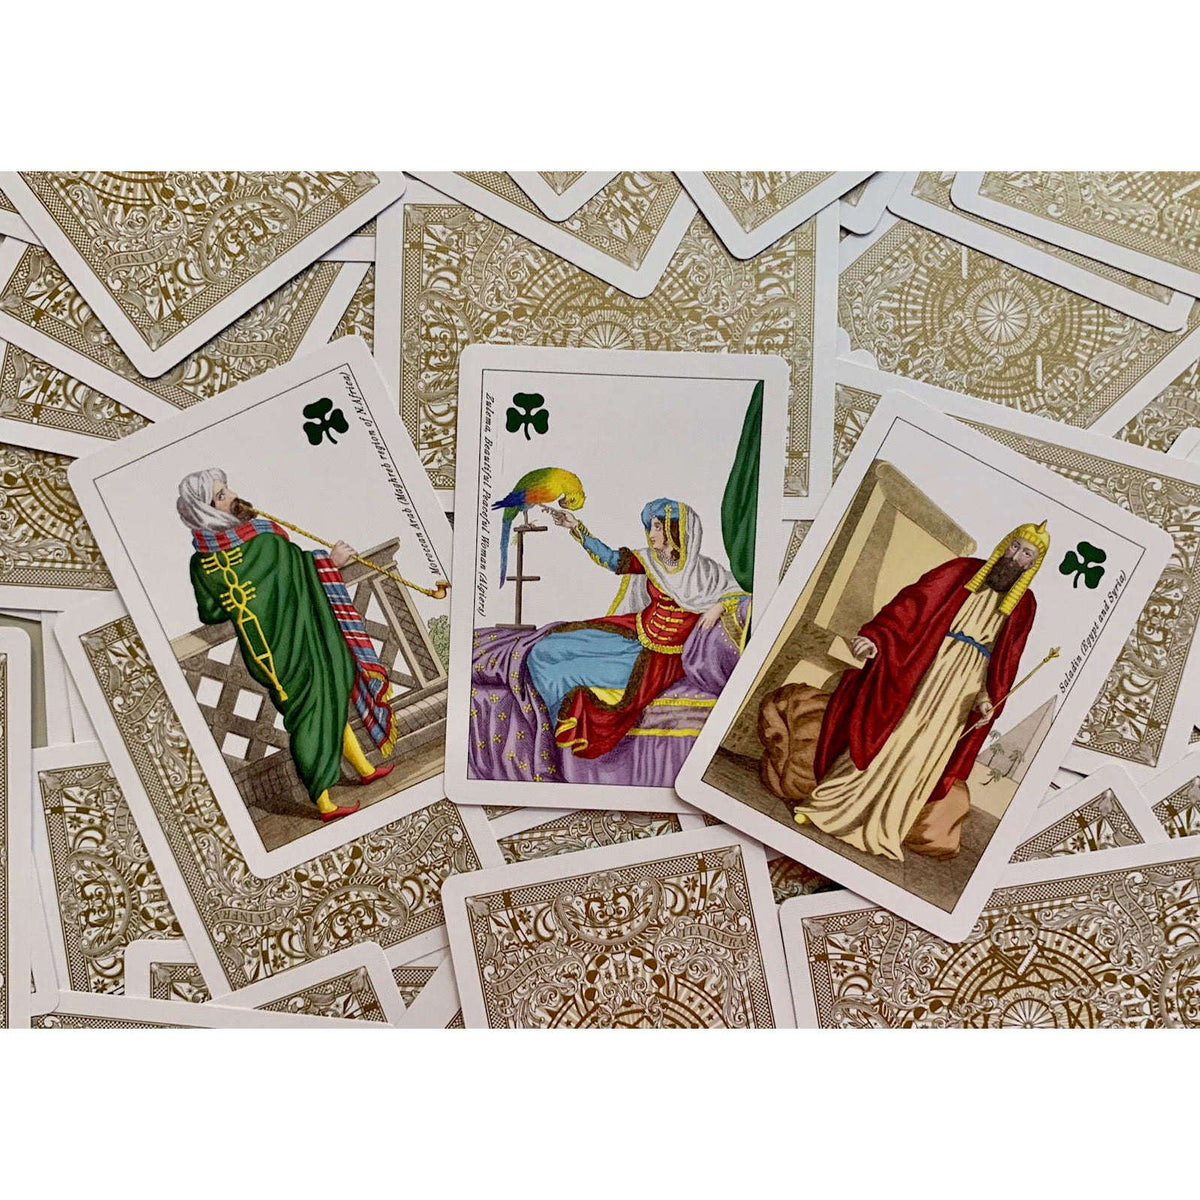 Geographical Playing Cards USPCC – TarotMerchant